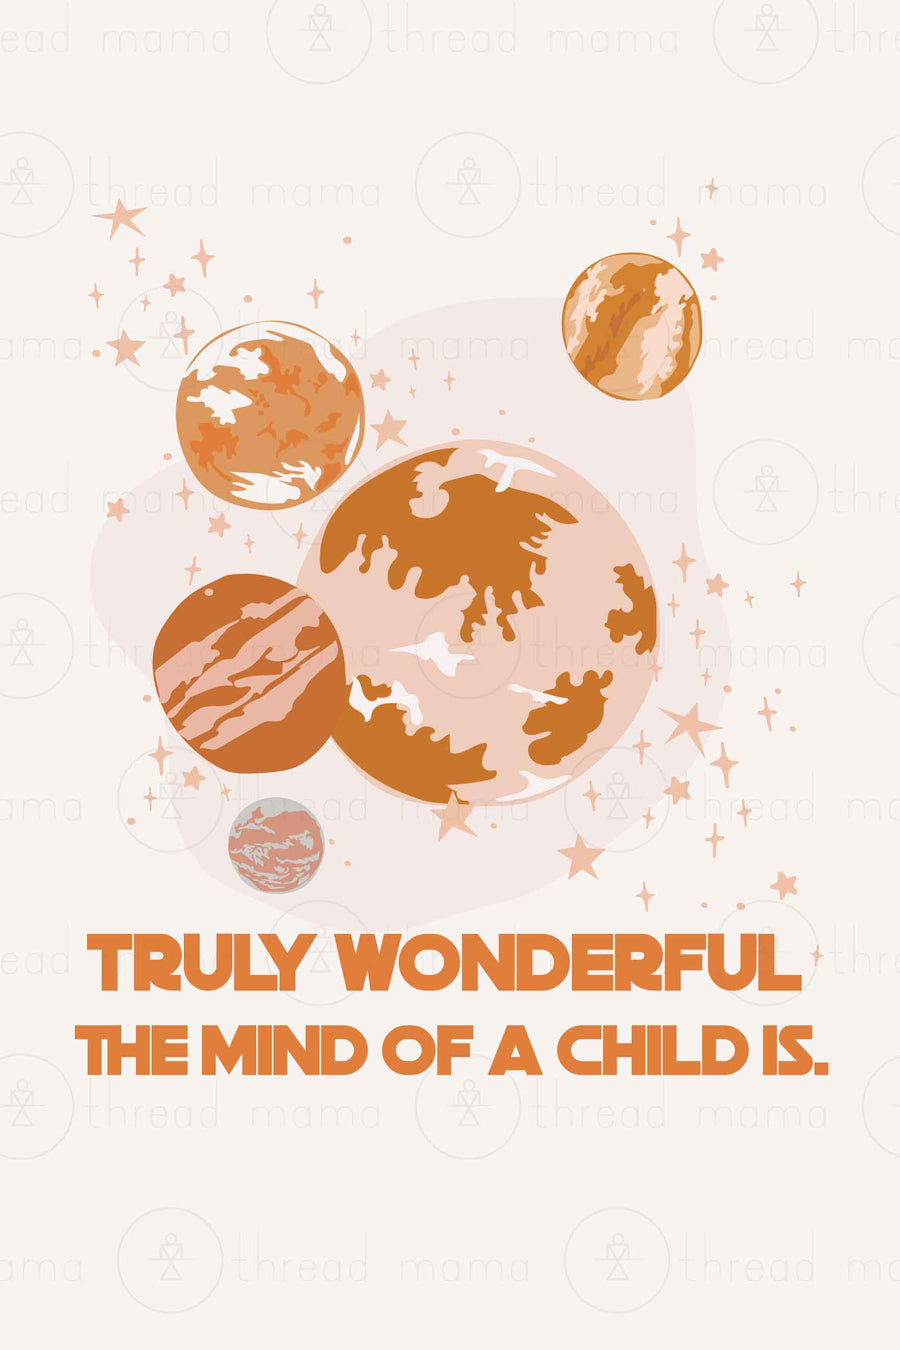 The Mind of a Child. (Printable Poster)